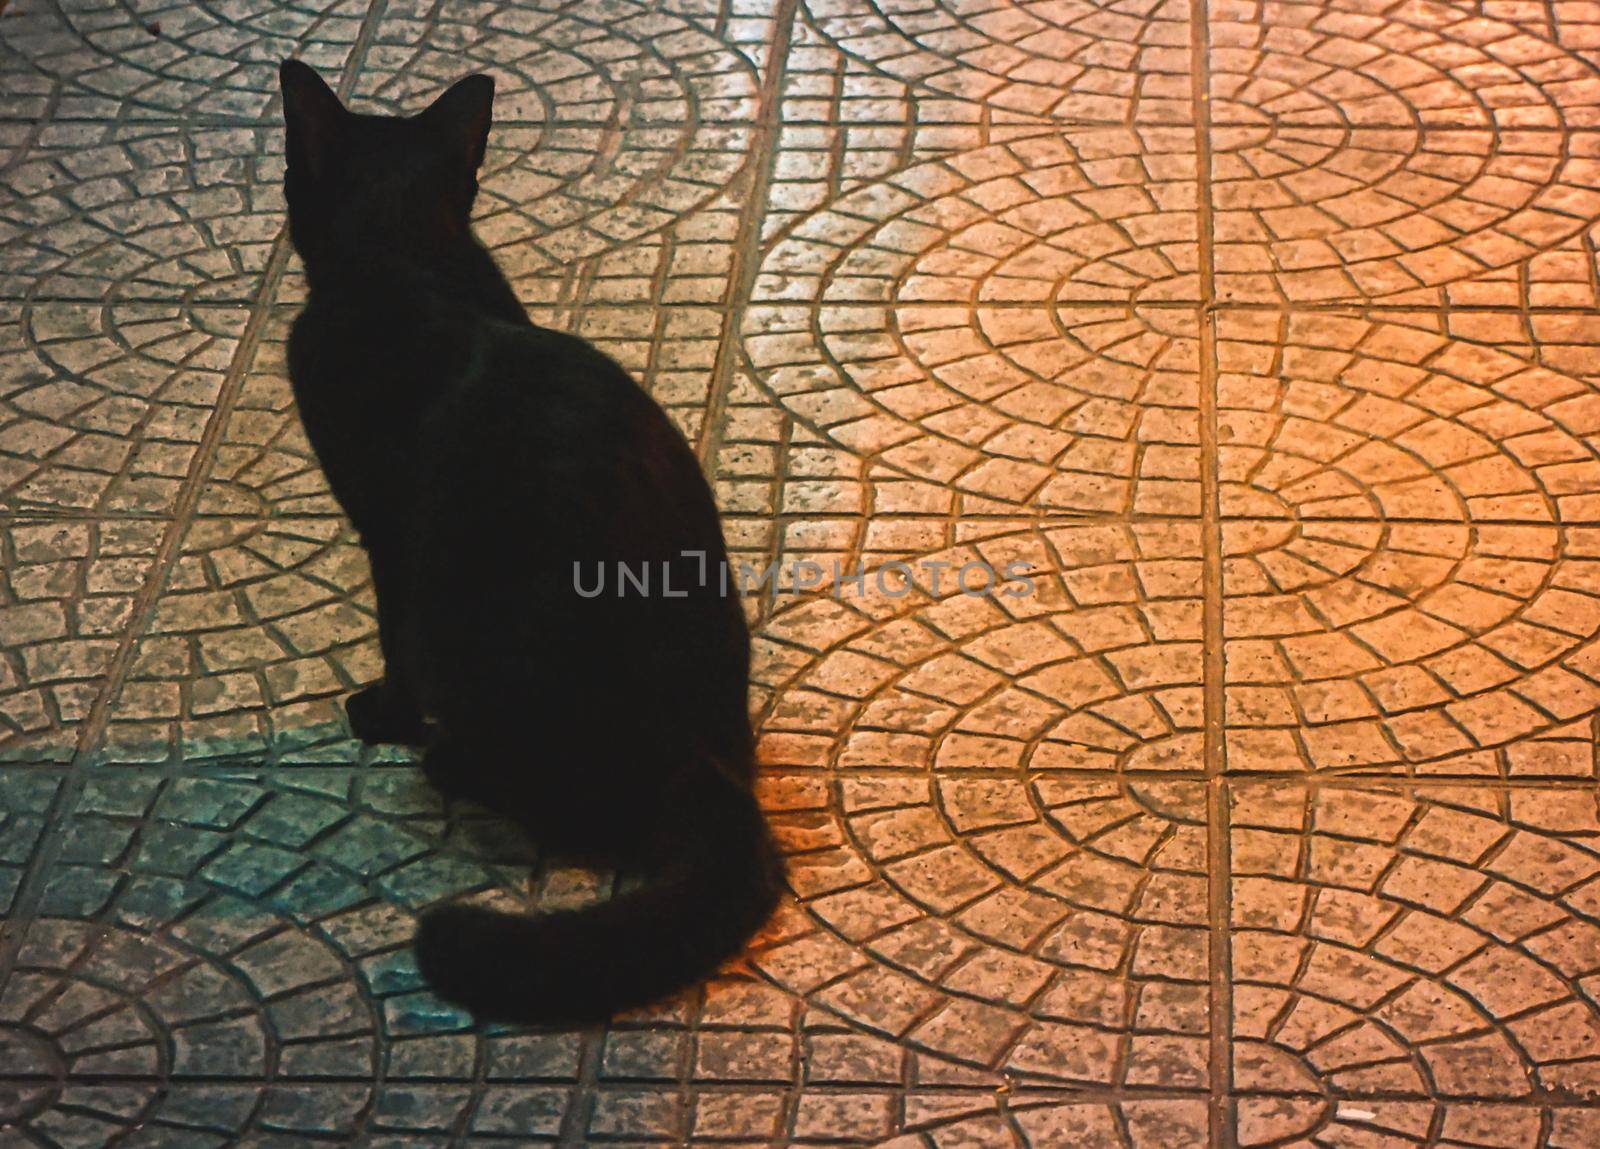 Black cat long tail back view animal alone sitting on street at night